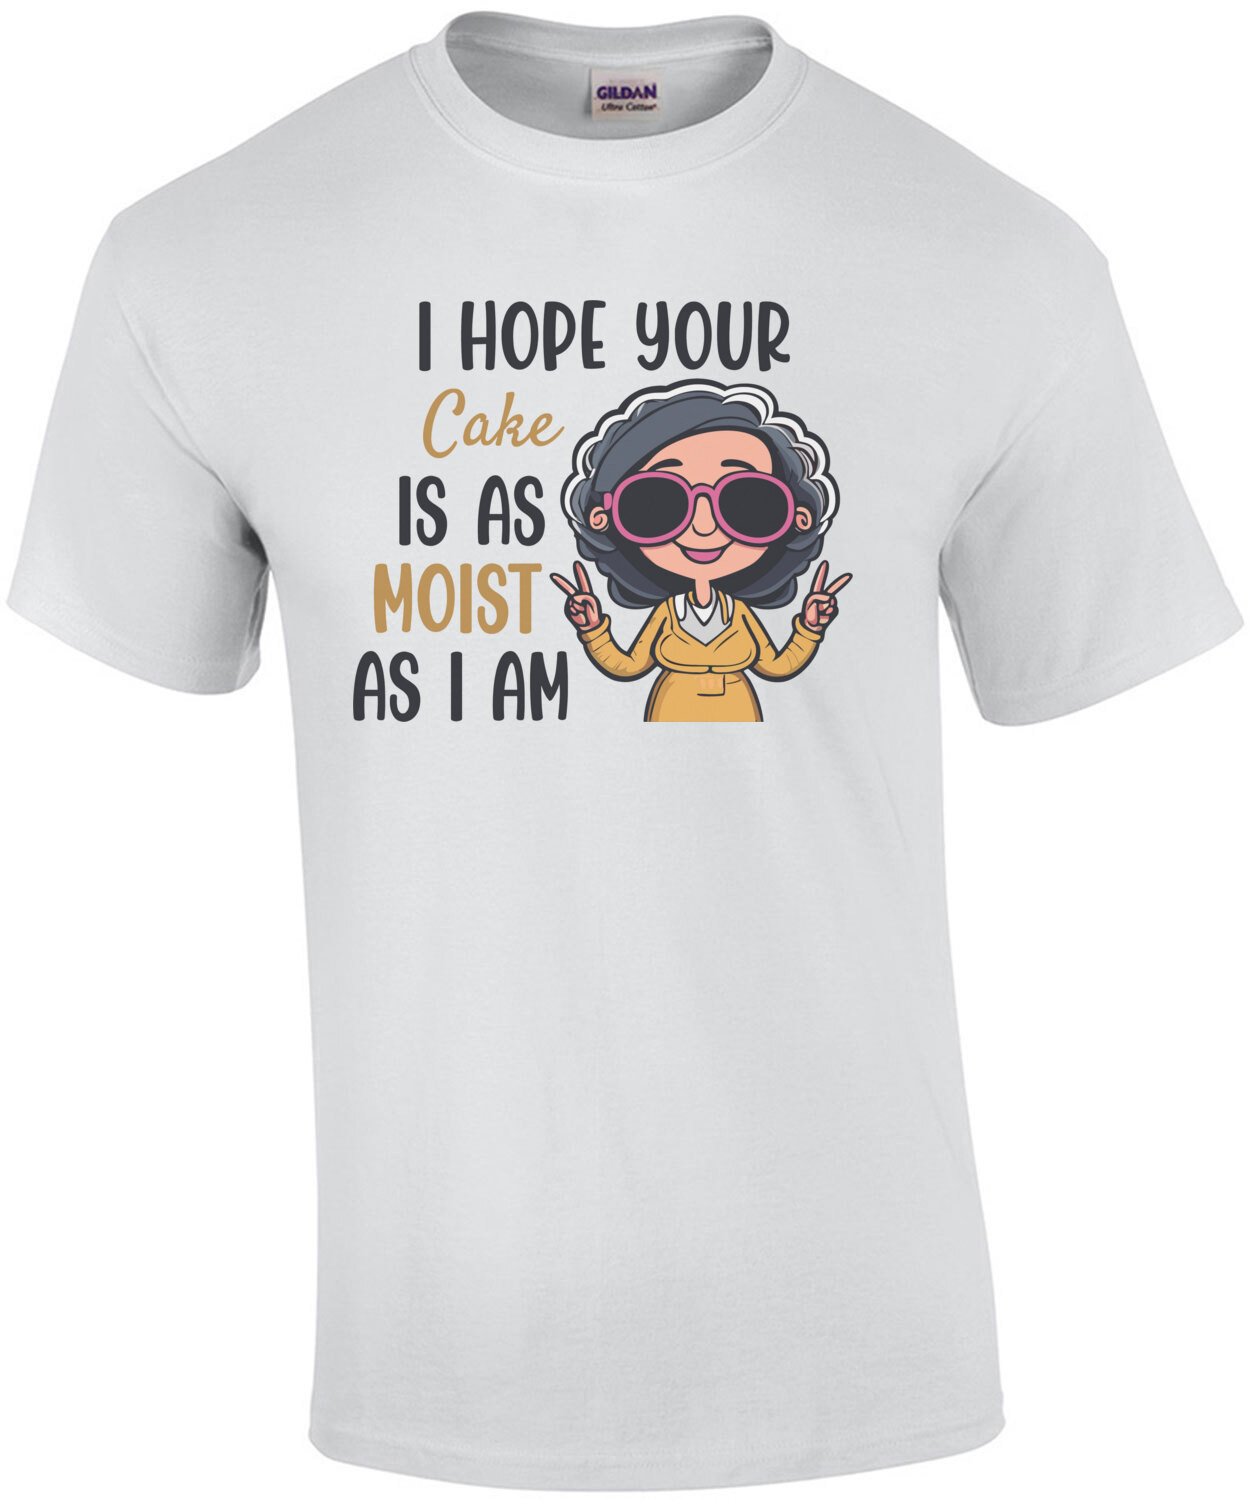 I hope your cake is as moist as I am - Funny Sexual Sarcastic T-Shirt